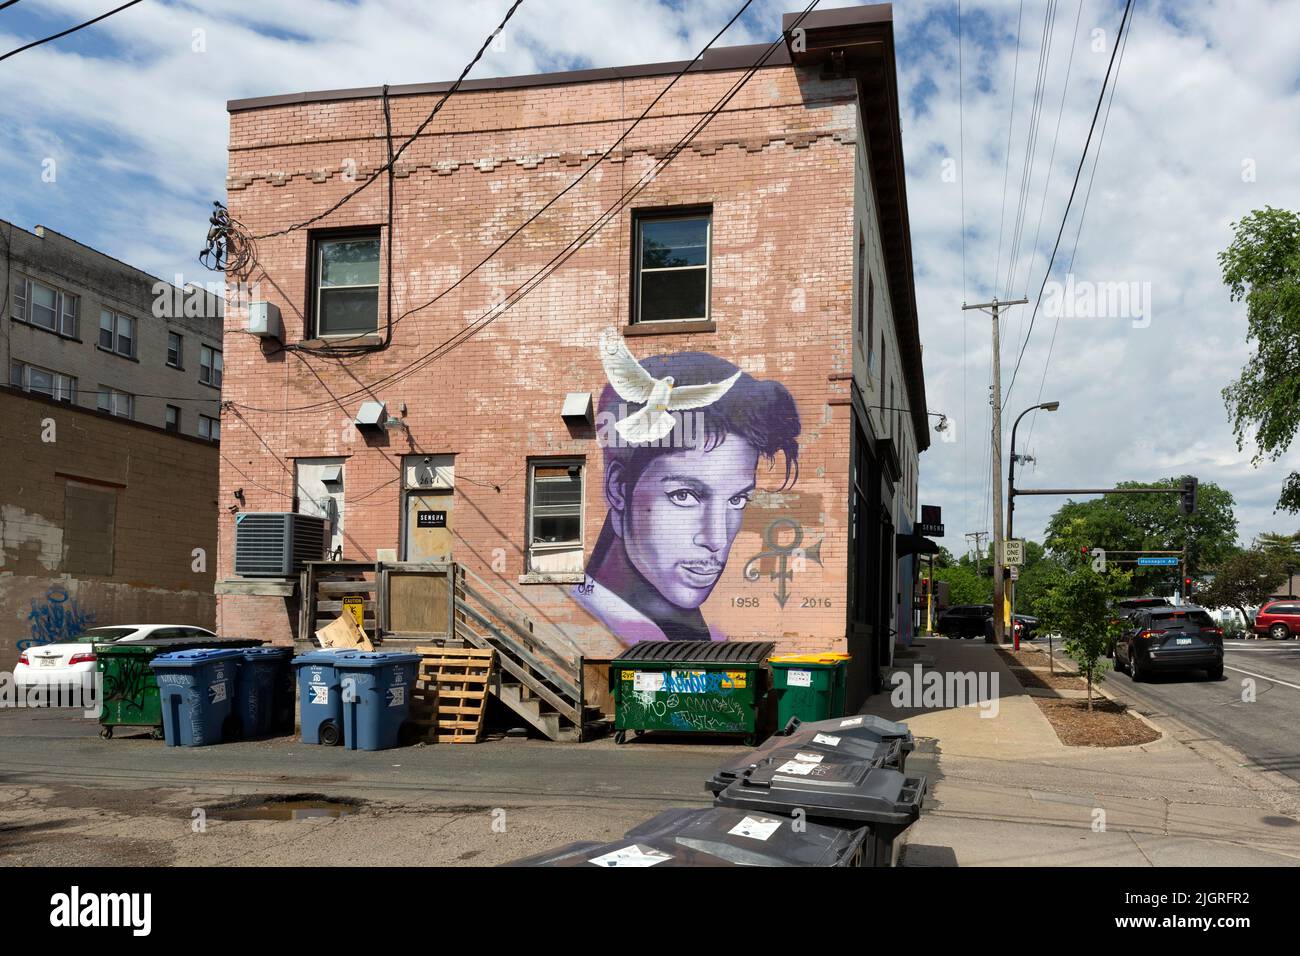 Spray painted mural portrait of American singer, songwriter, musician, record producer, dancer, and actor Prince in Uptown Minneapolis, Minnesota. Stock Photo